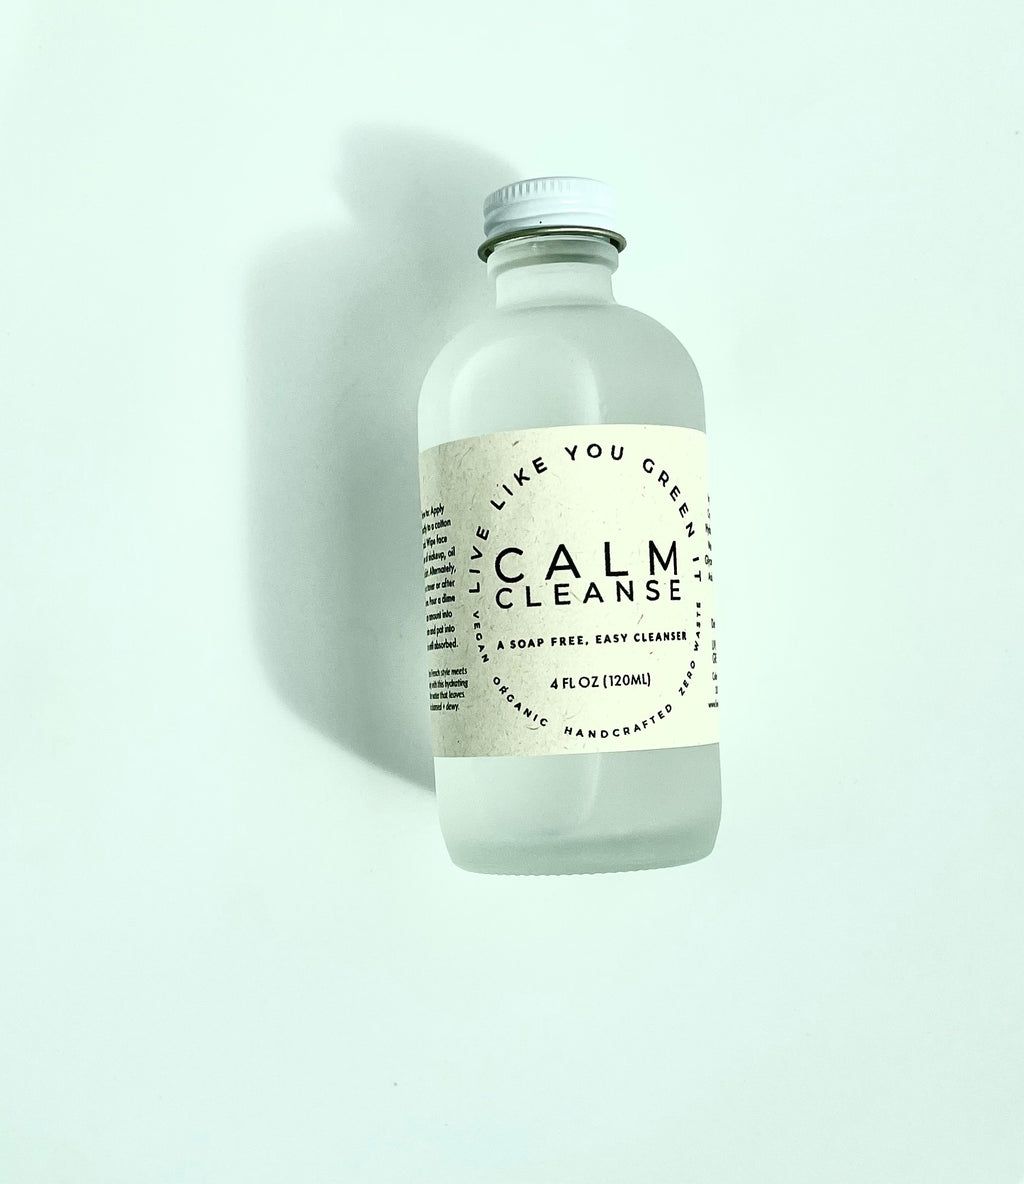 Calm Cleanse | Gentle Face Wash & Toner | Makeup Remover | Micellar Water, Rose Water & Hyaluronic Acid | Hydrating Cleansing Toner Live Like You Green It